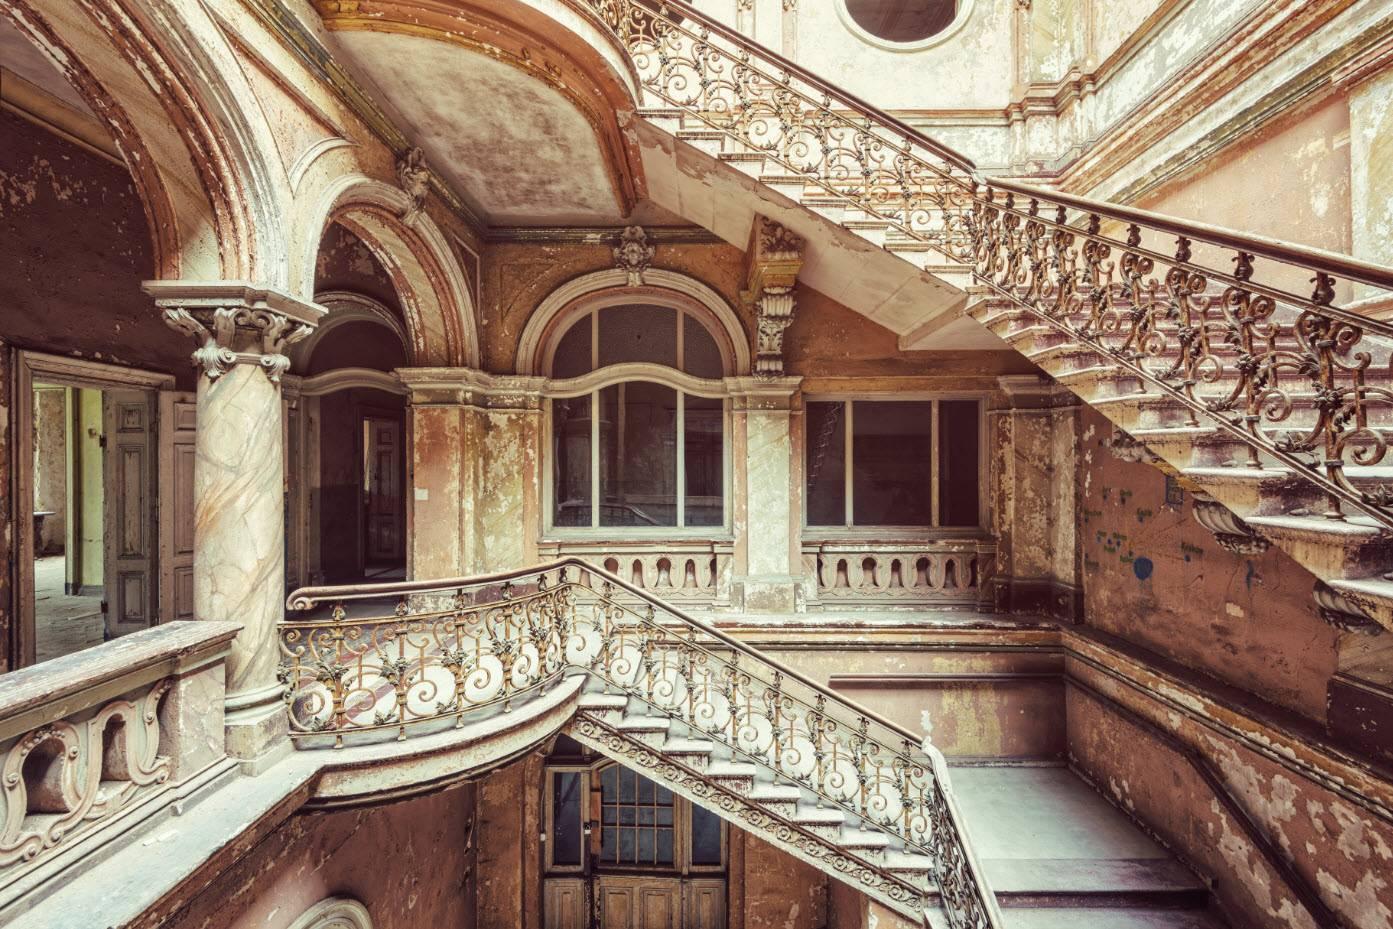 Schody by Gina Soden  - Interior photography, abandoned palace, urbex